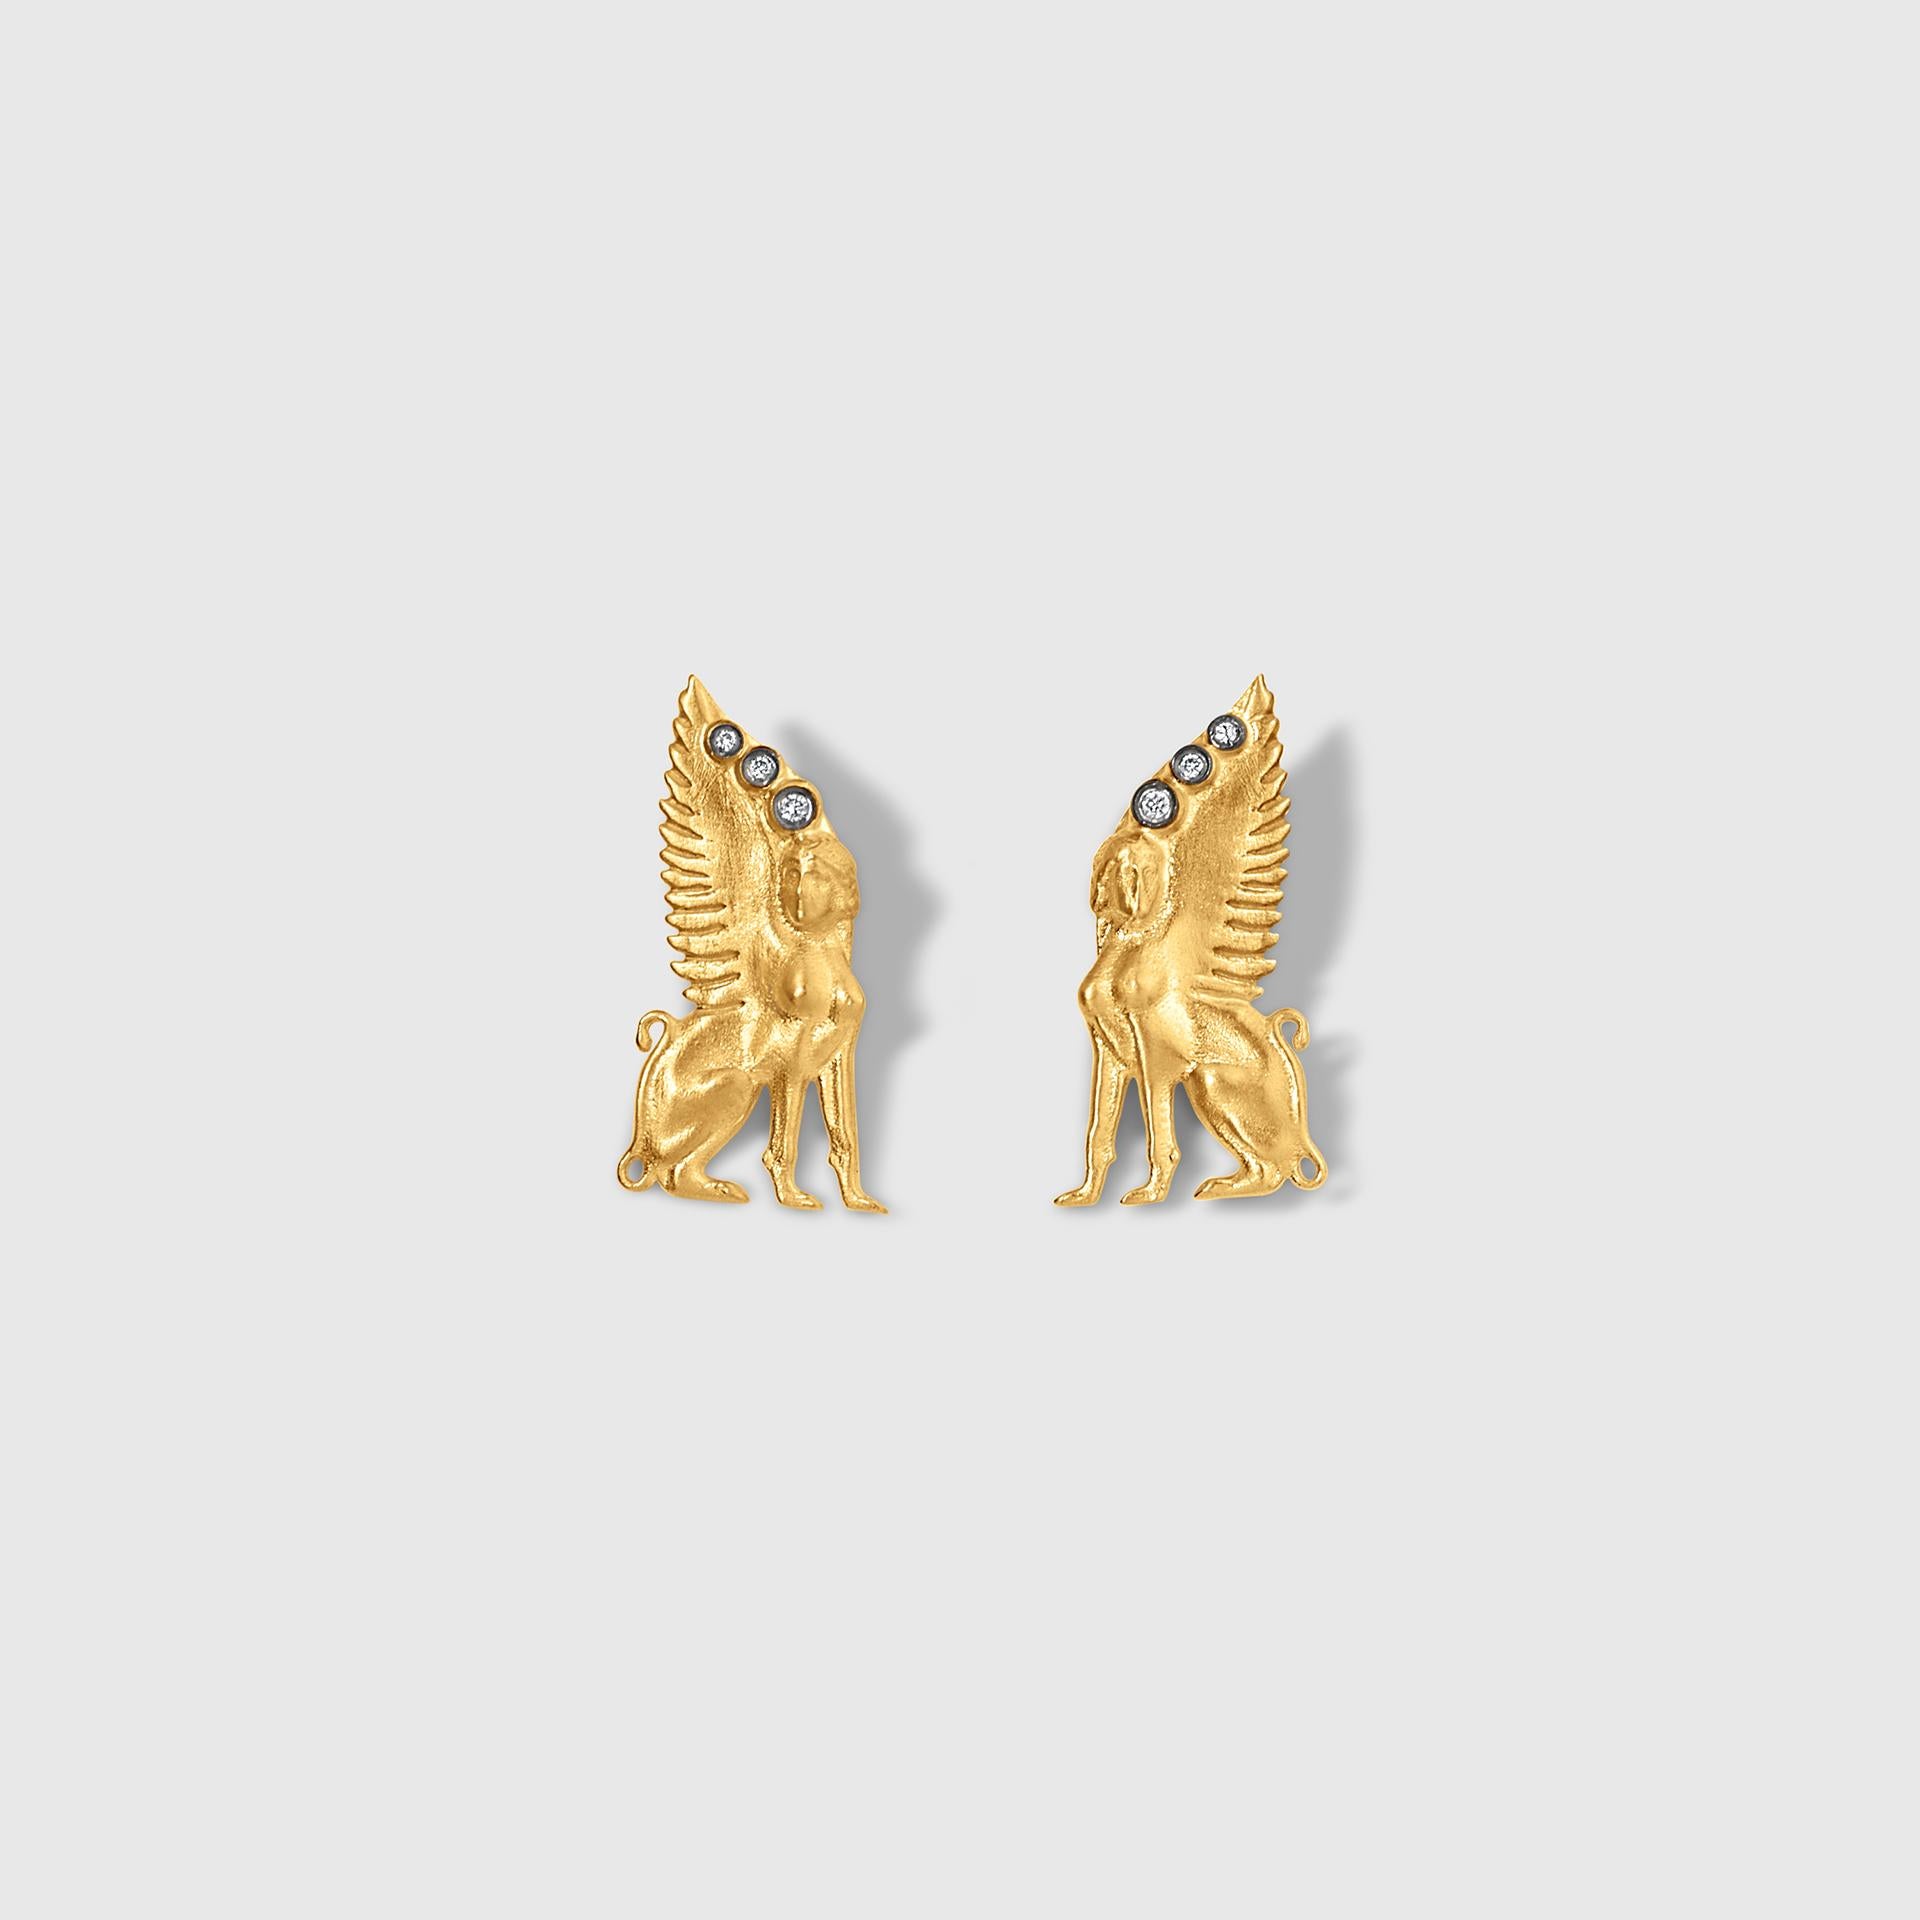 Archaeological Urartian Sphynx Post Earrings with Diamond Detail, 24kt Yellow Gold and Silver, Size Medium, Length: 1